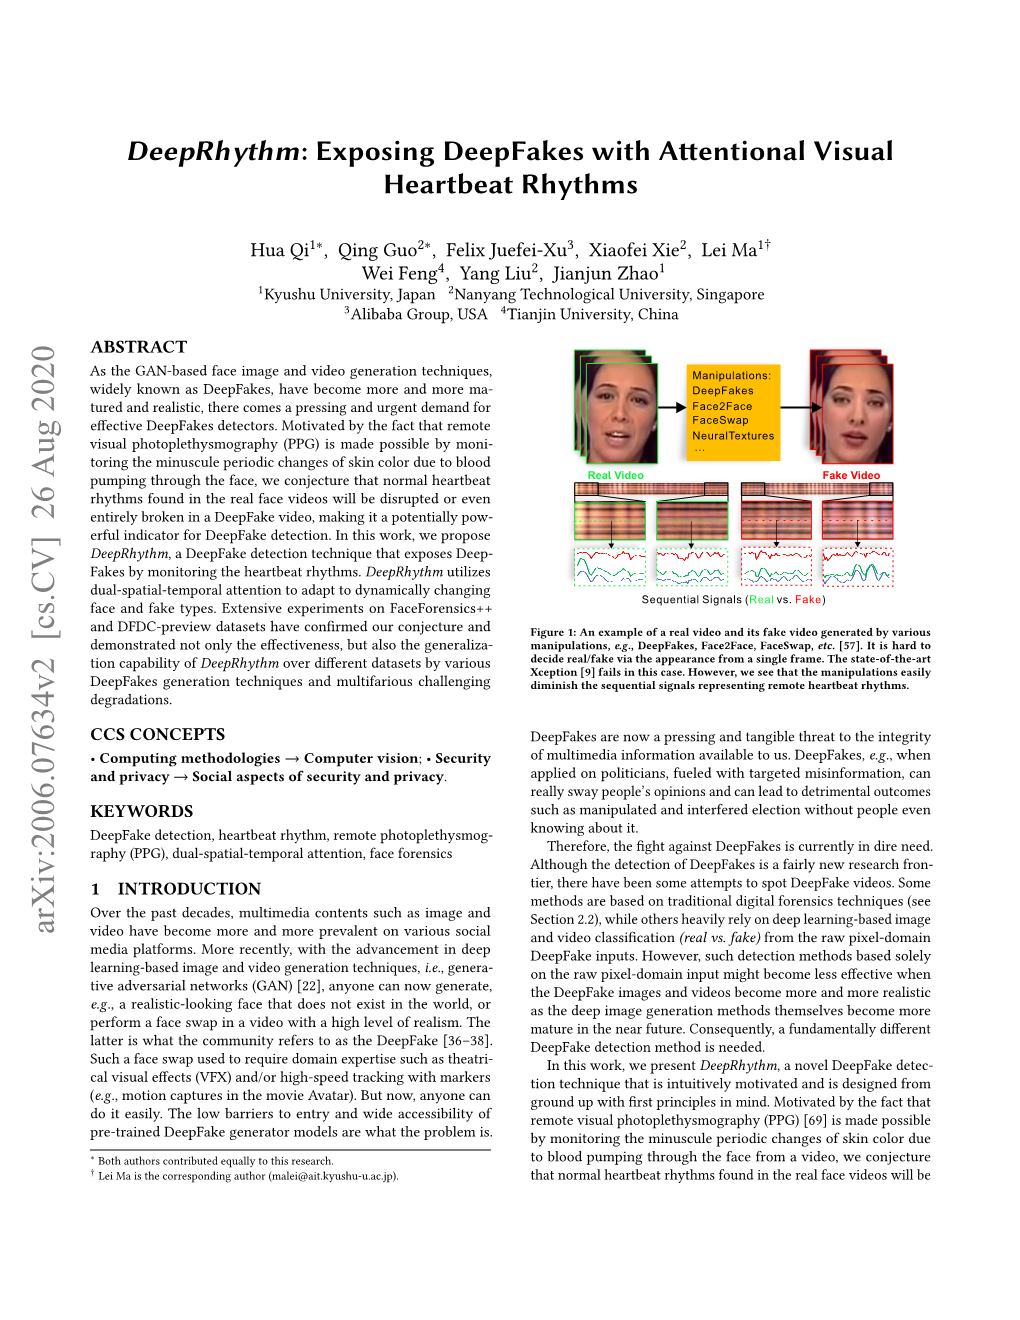 Exposing Deepfakes with Attentional Visual Heartbeat Rhythms